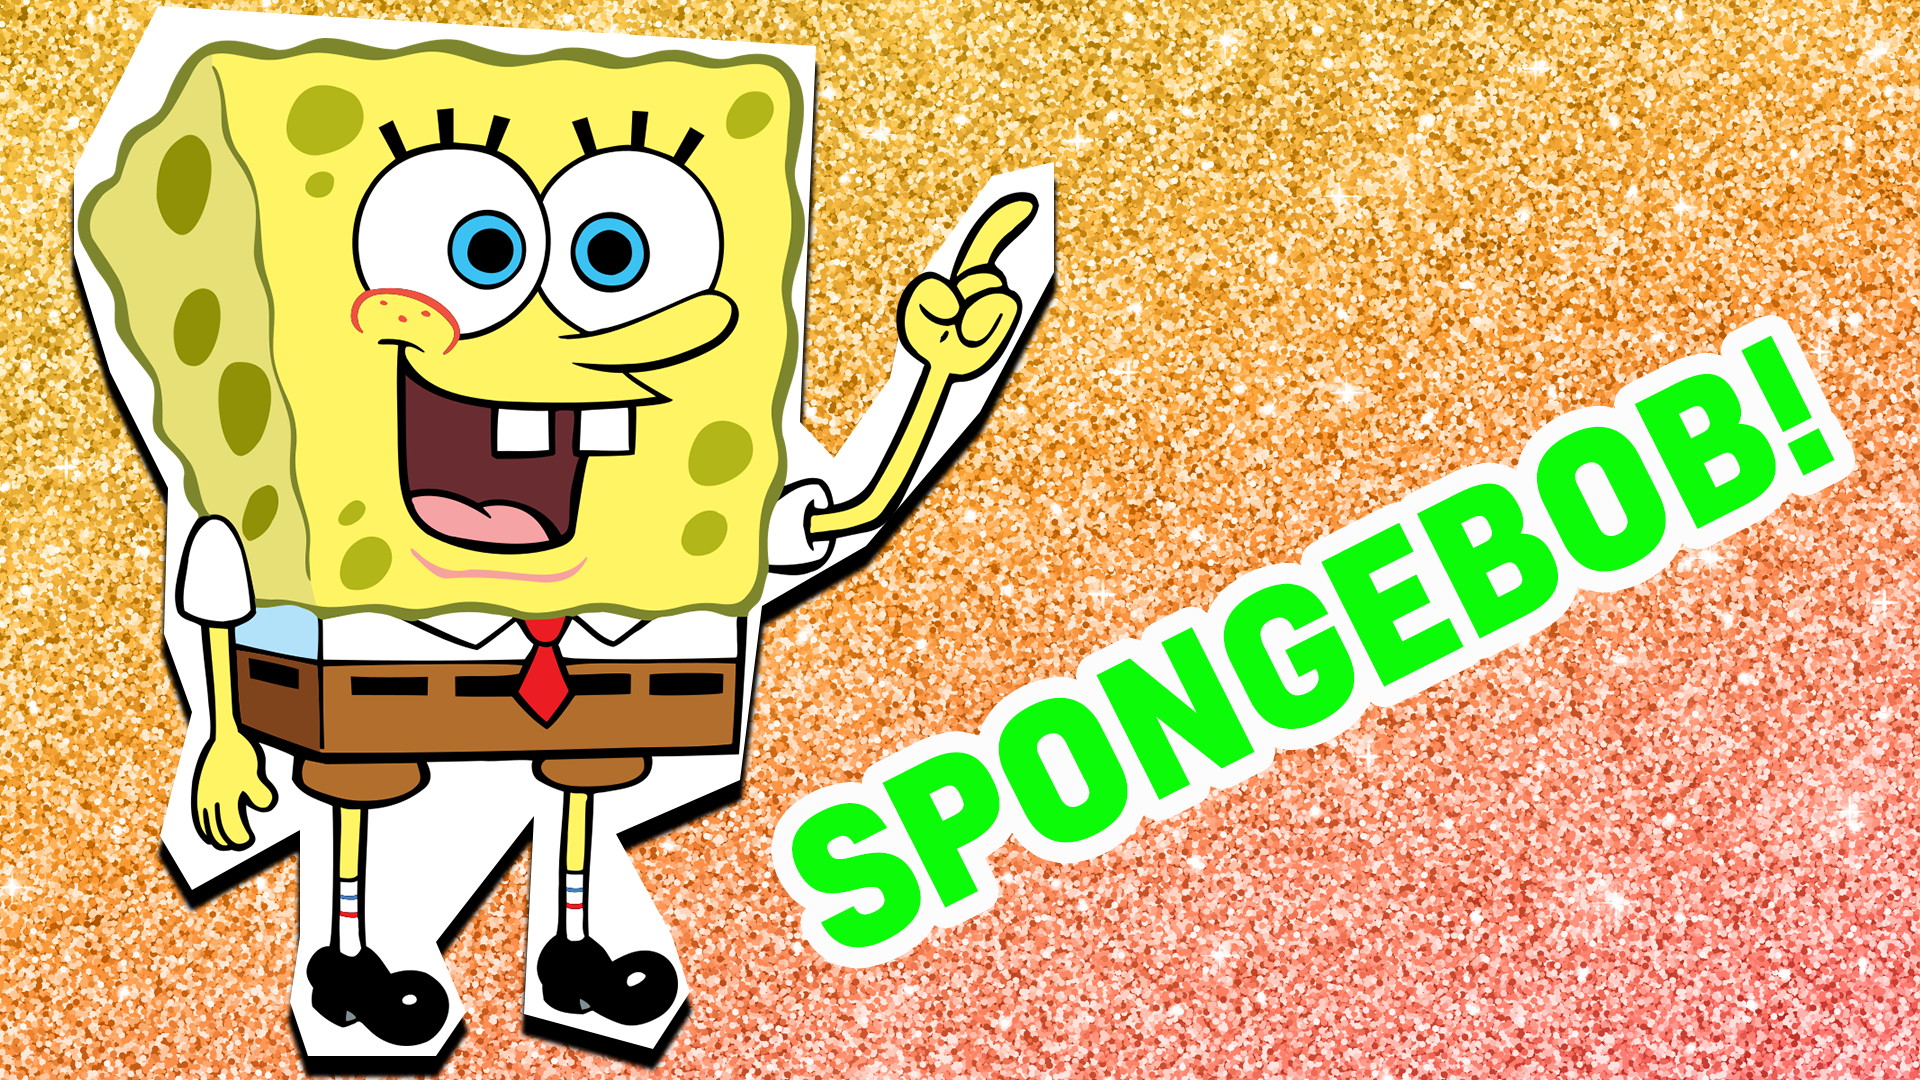 You're SpongeBob! You're fun, curious, a good friend and a good laugh! You're always up for an adventure and you probably love pineapples!